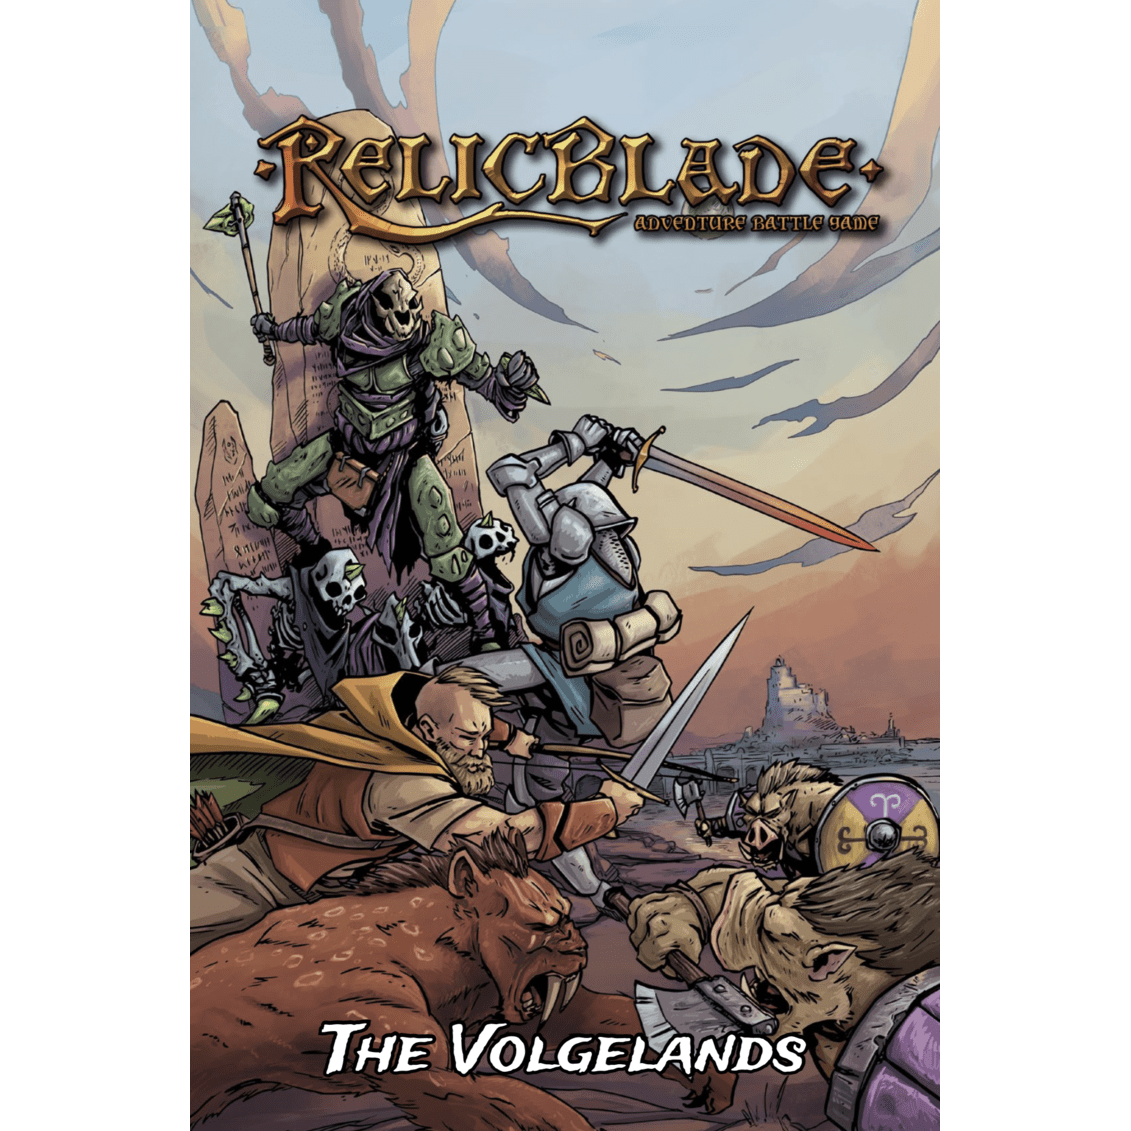 The Volgelands Campaign Book Book Metal King Studio Exit 23 Games The Volgelands Campaign Book